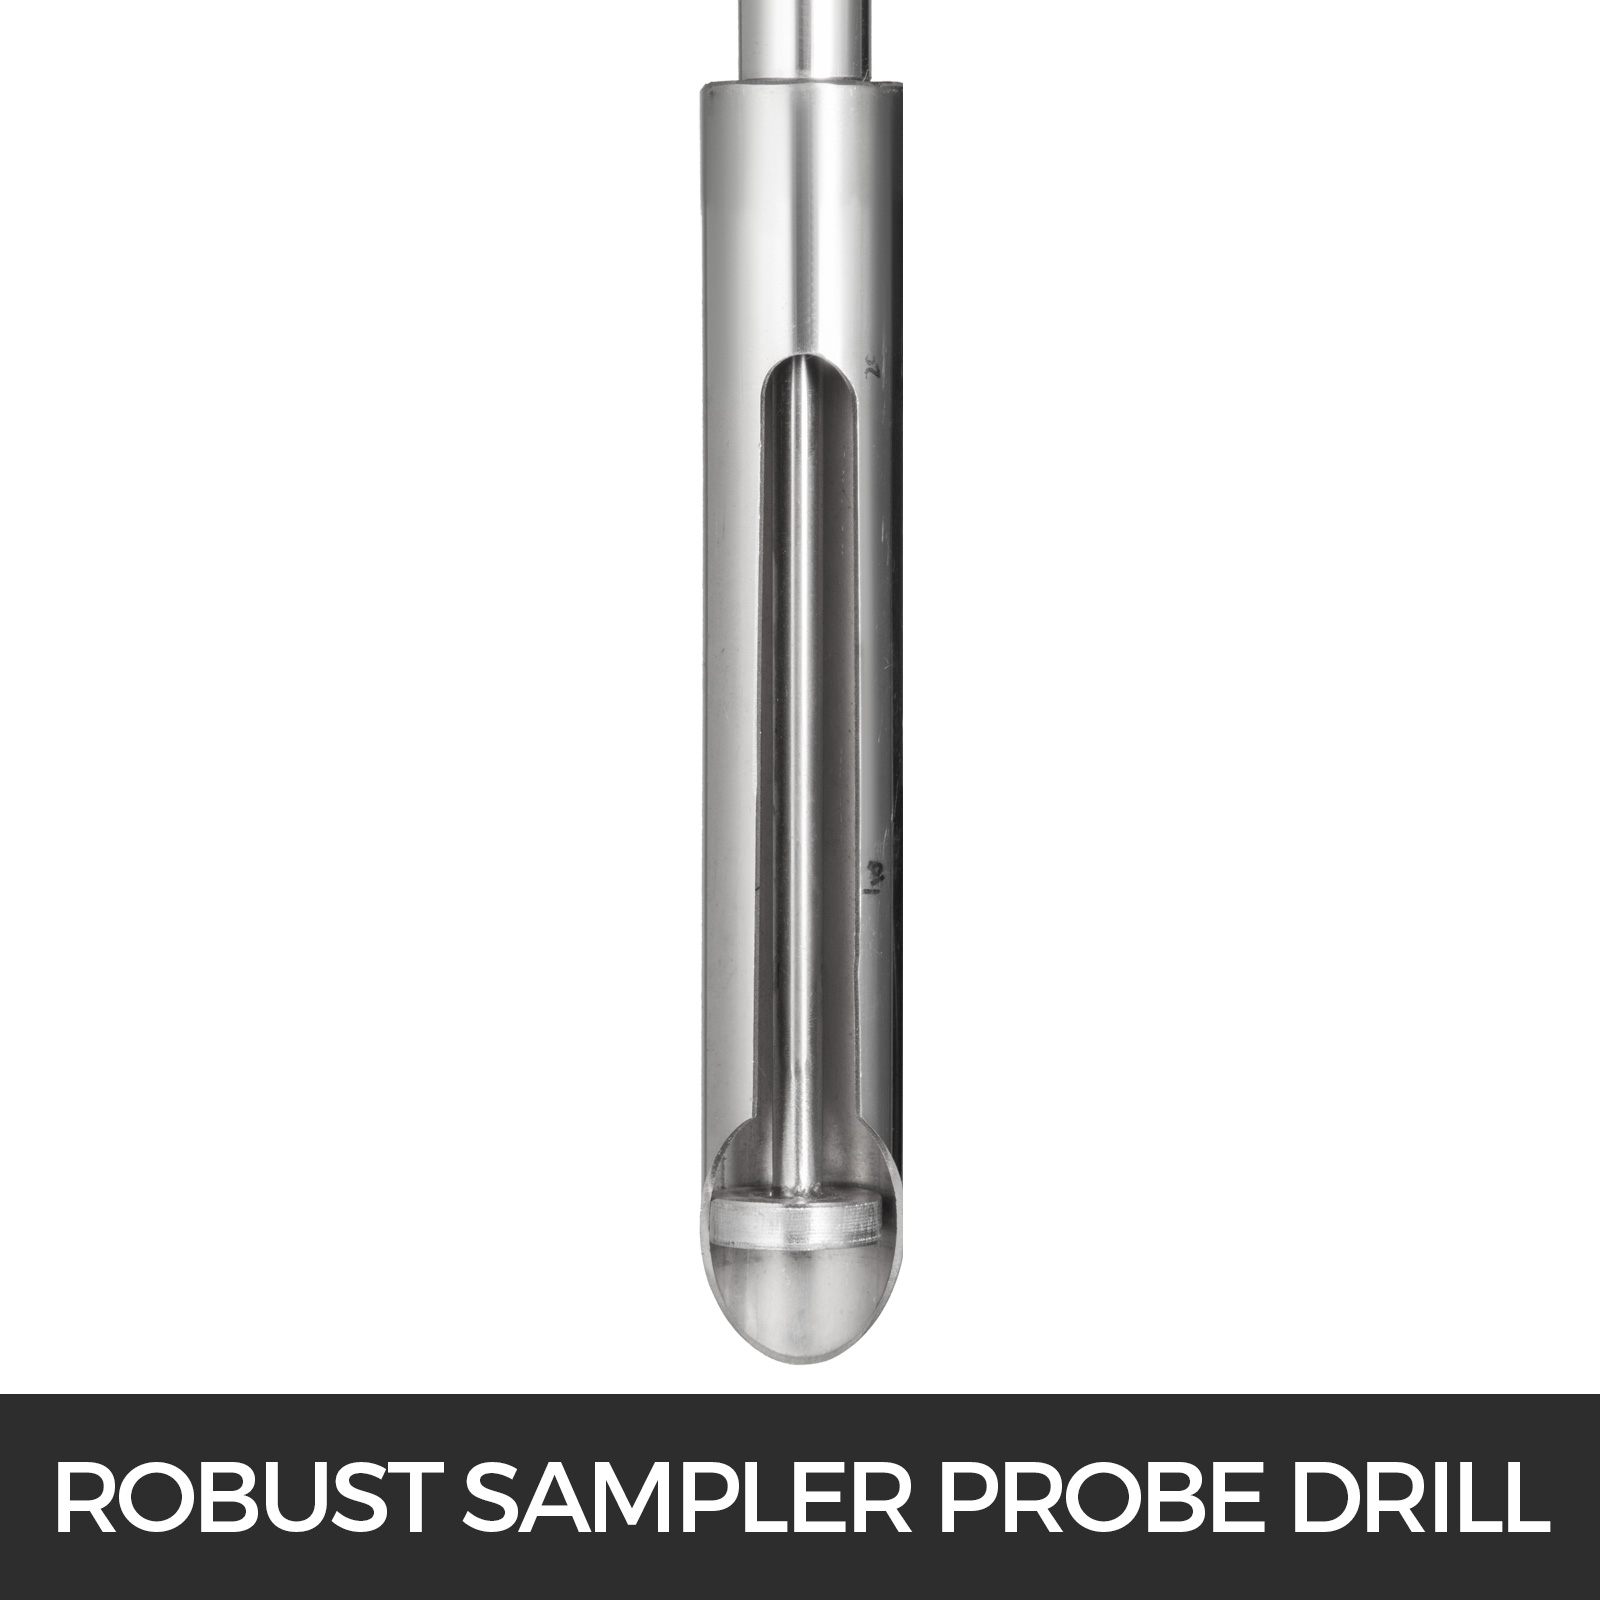 Details about   304 Stainless steel soil probe sampler with ejector eject bore foot pedal New b 